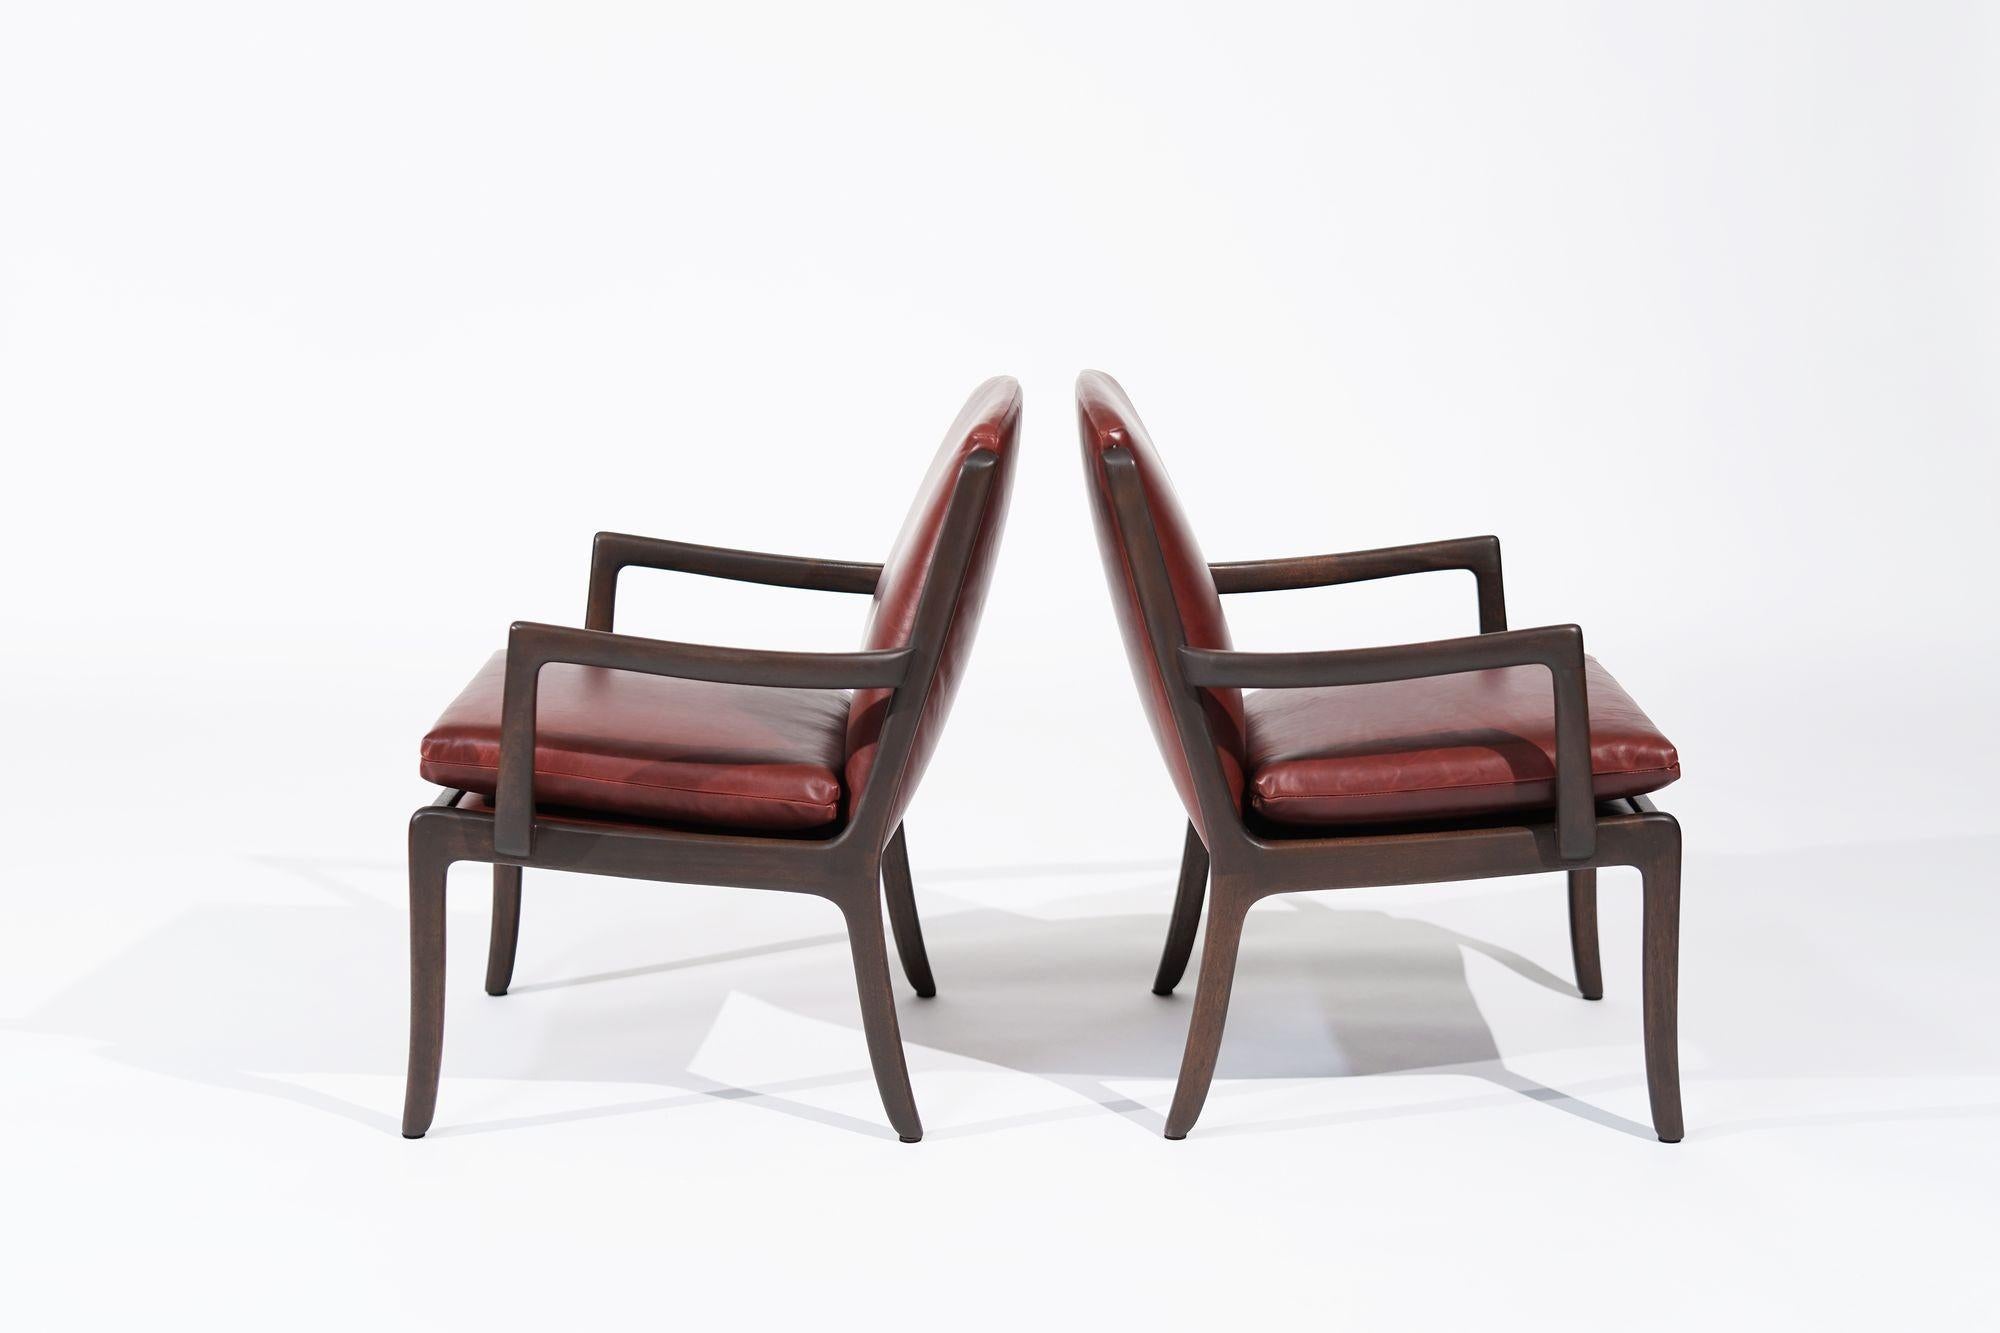 20th Century Set of Lounge Chairs by Ole Wanscher in Sangria Leather, Denmark, C. 1960s For Sale